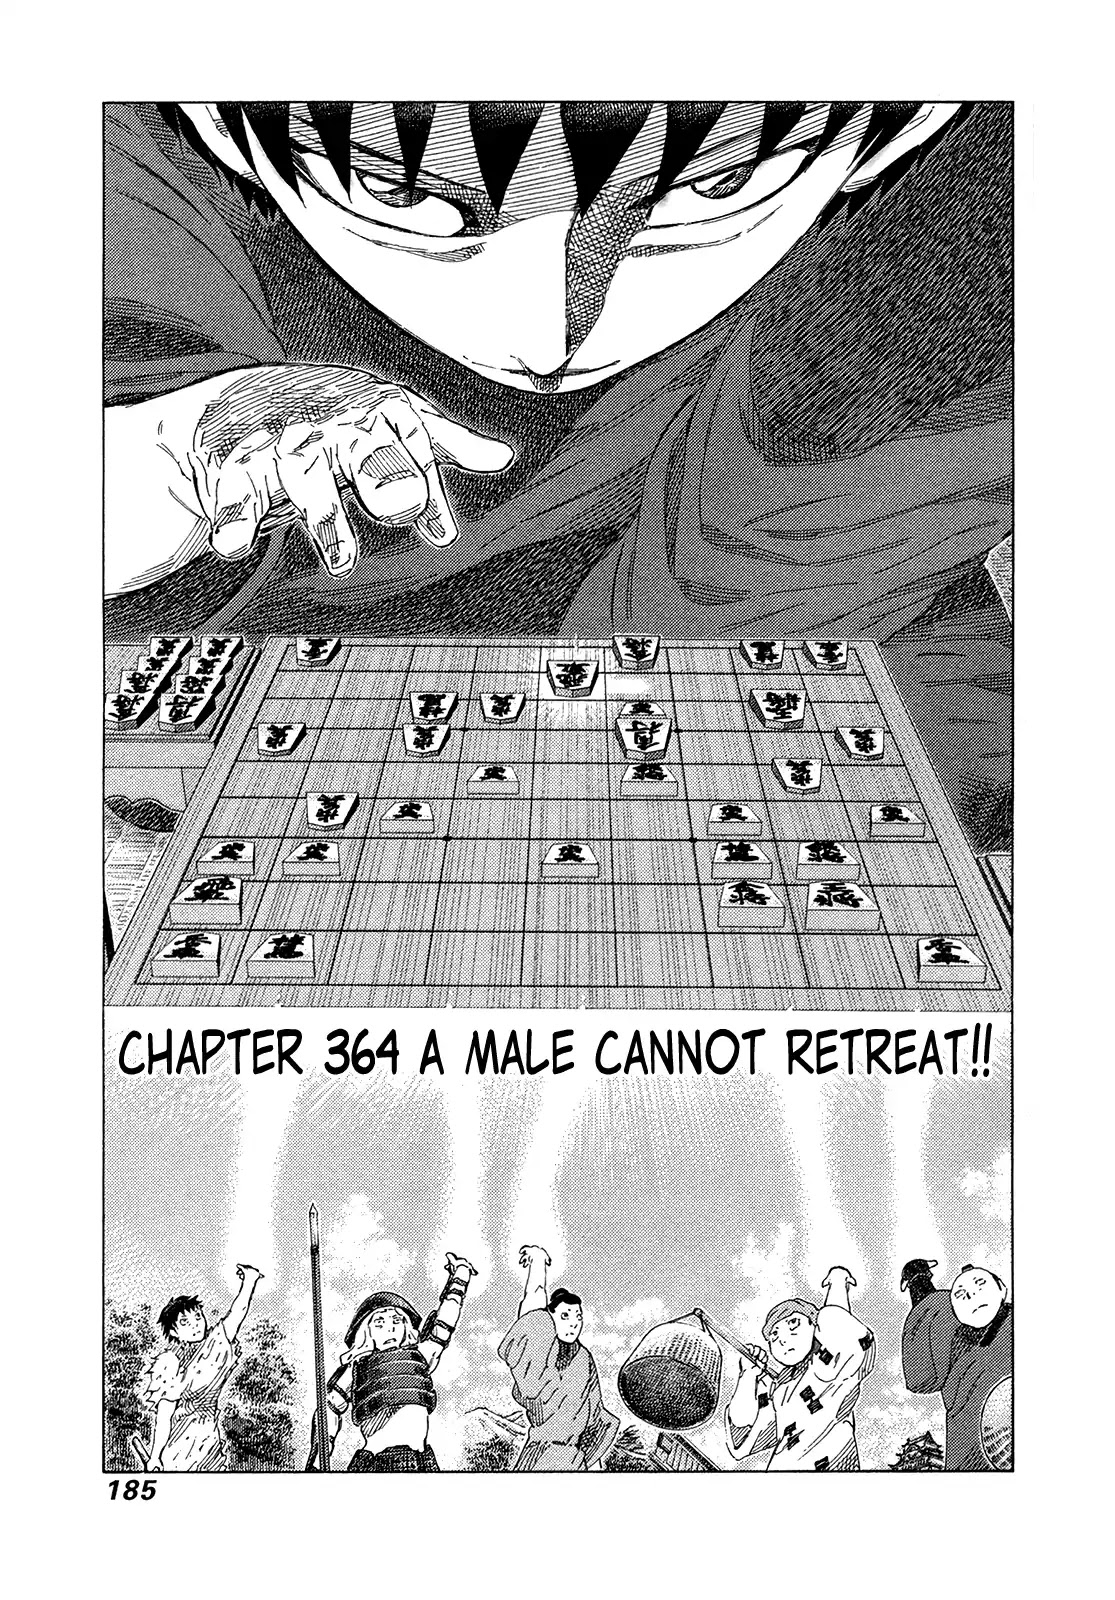 81 Diver Chapter 364 #1